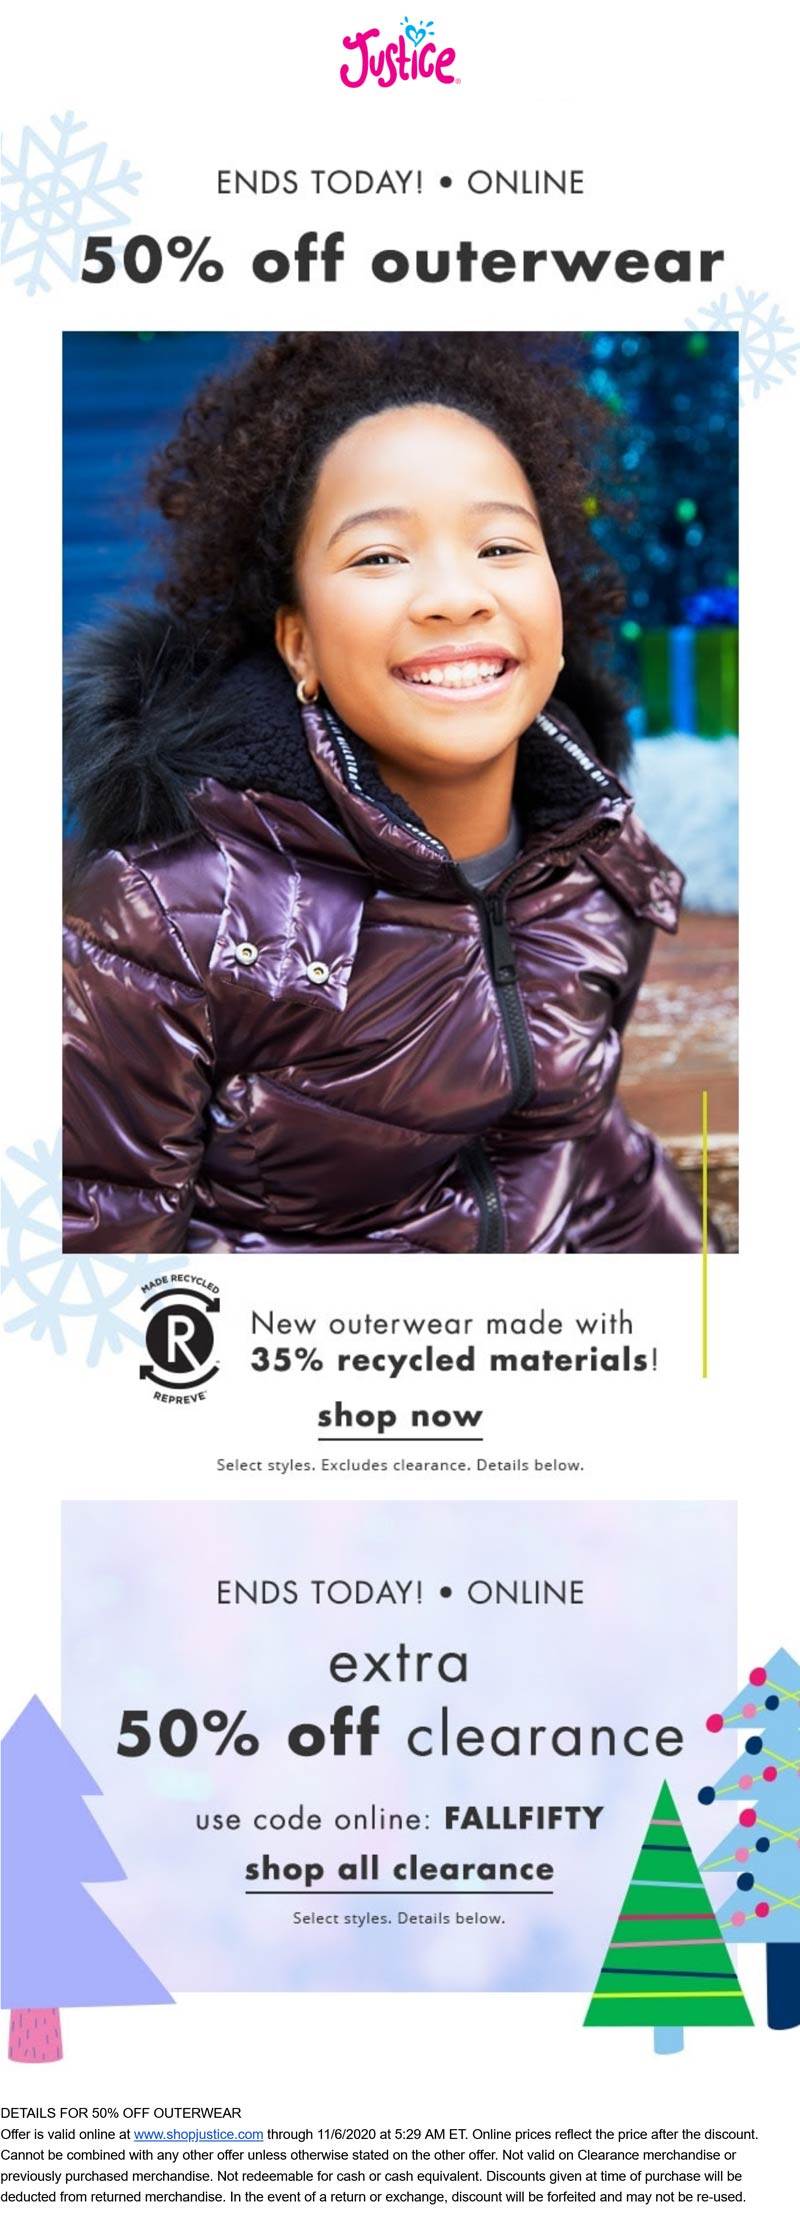 Justice stores Coupon  50% off outerwear & clearance today at Justice via promo code FALLFIFTY #justice 